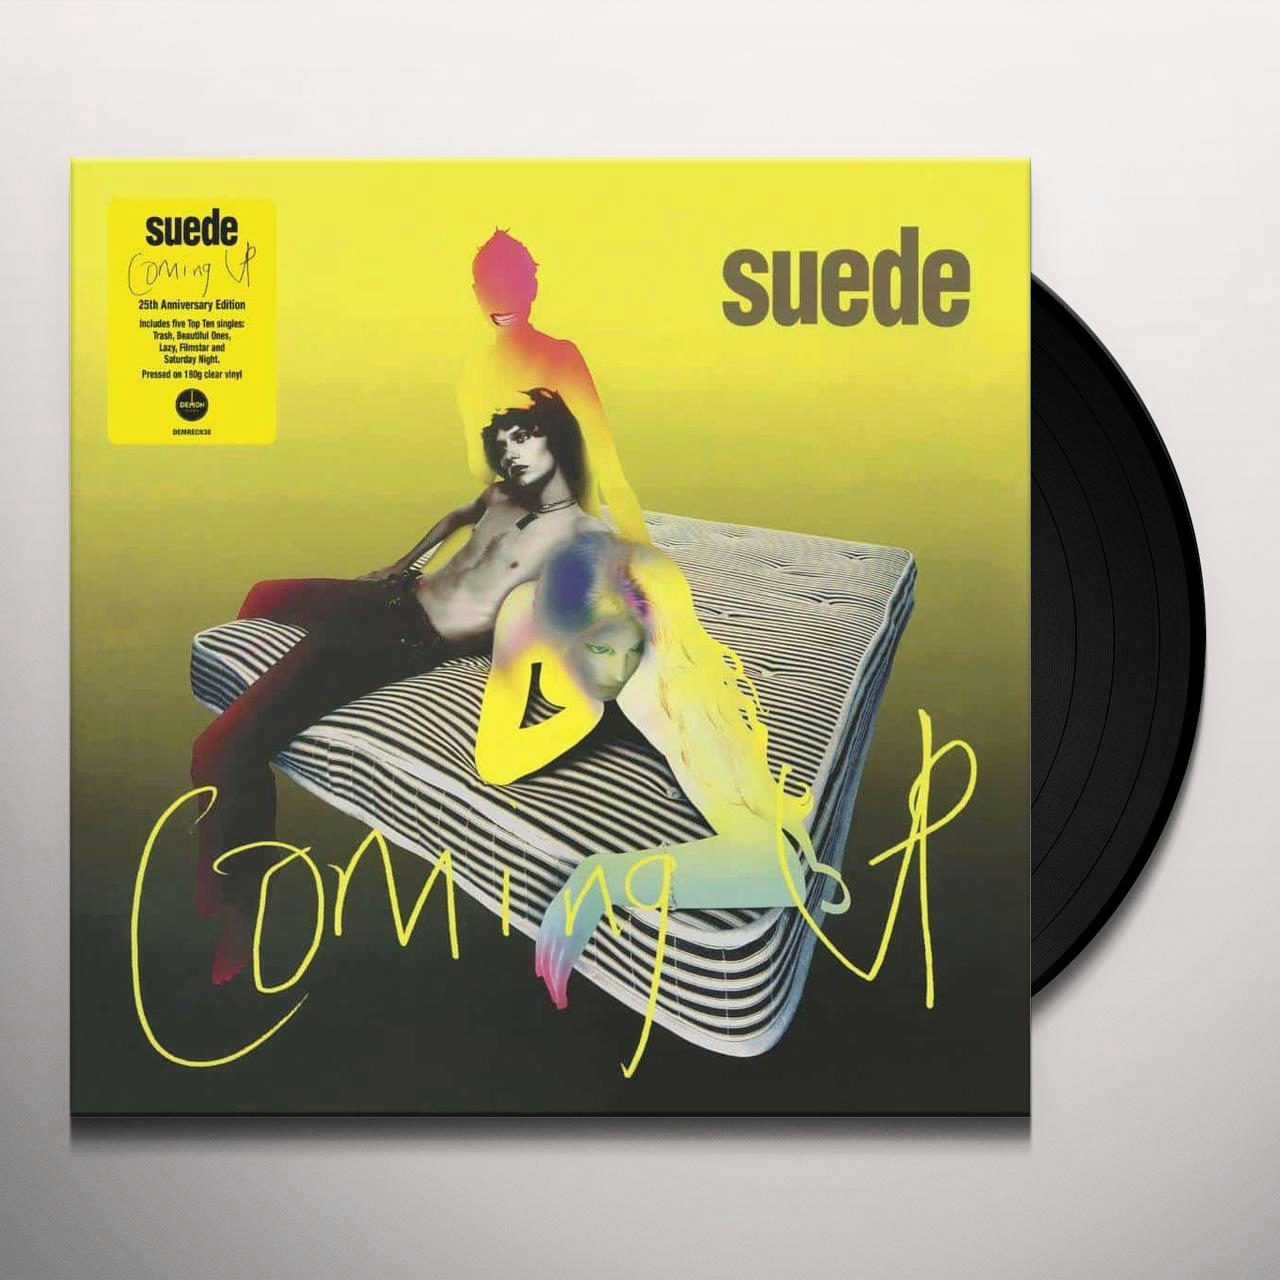 Suede COMING UP: 25TH ANNIVERSARY EDITION CD